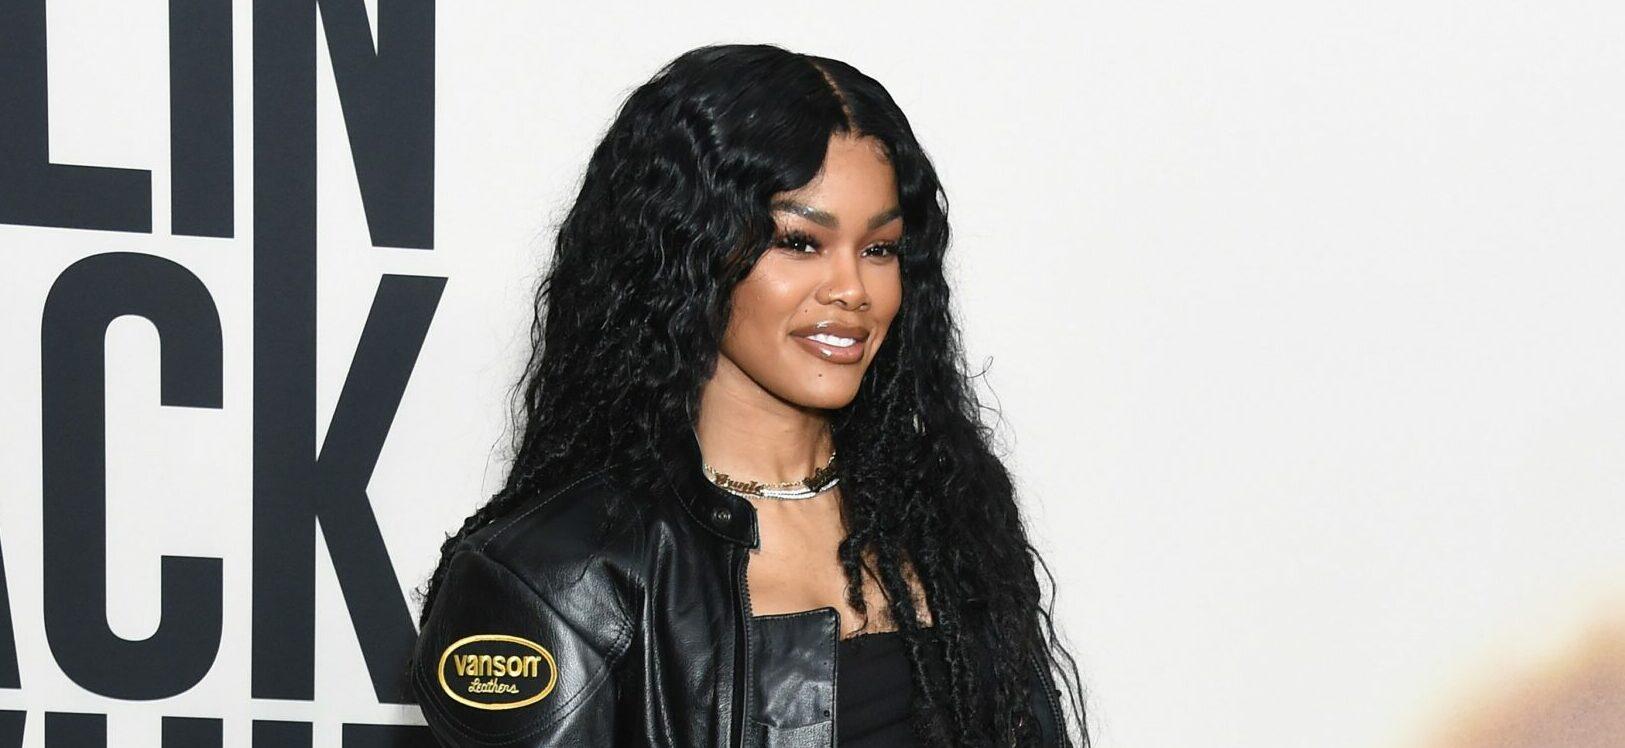 Teyana Taylor on the red carpet